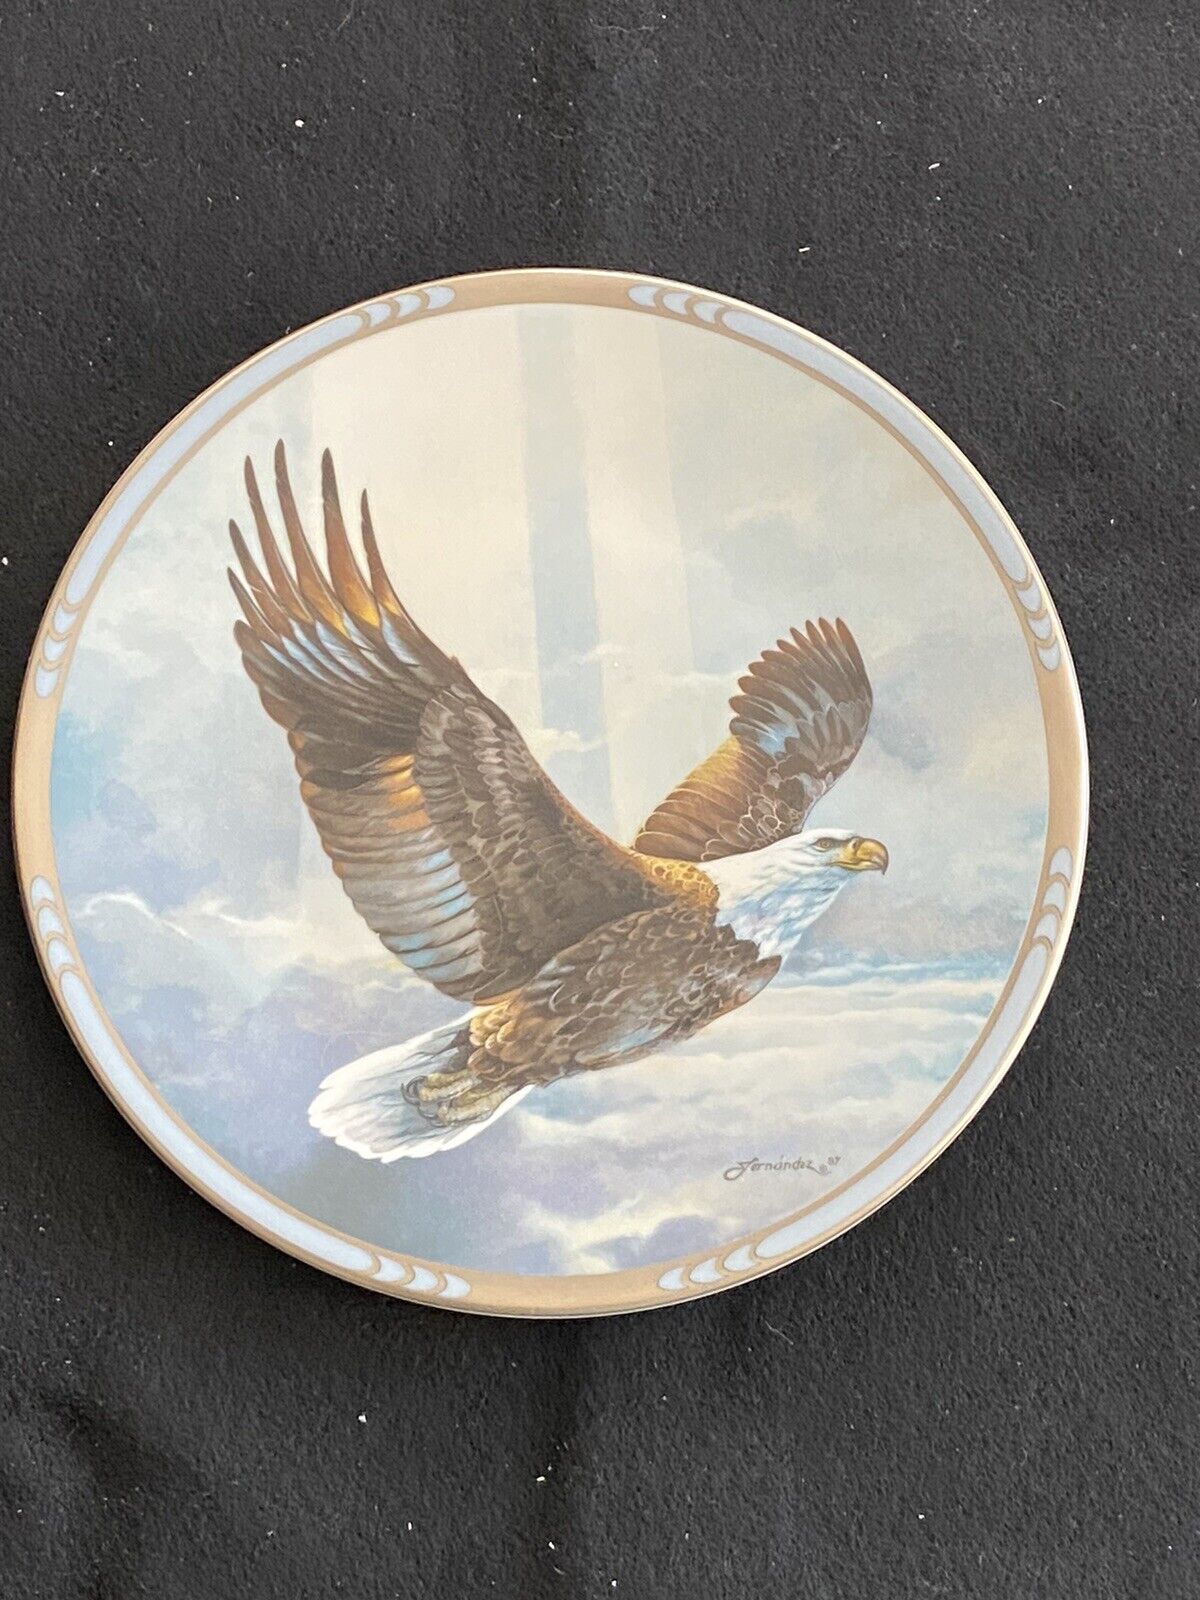 Eagle “Rise Above The Storm” Plate #B3291 by The Fountainhead Corporation